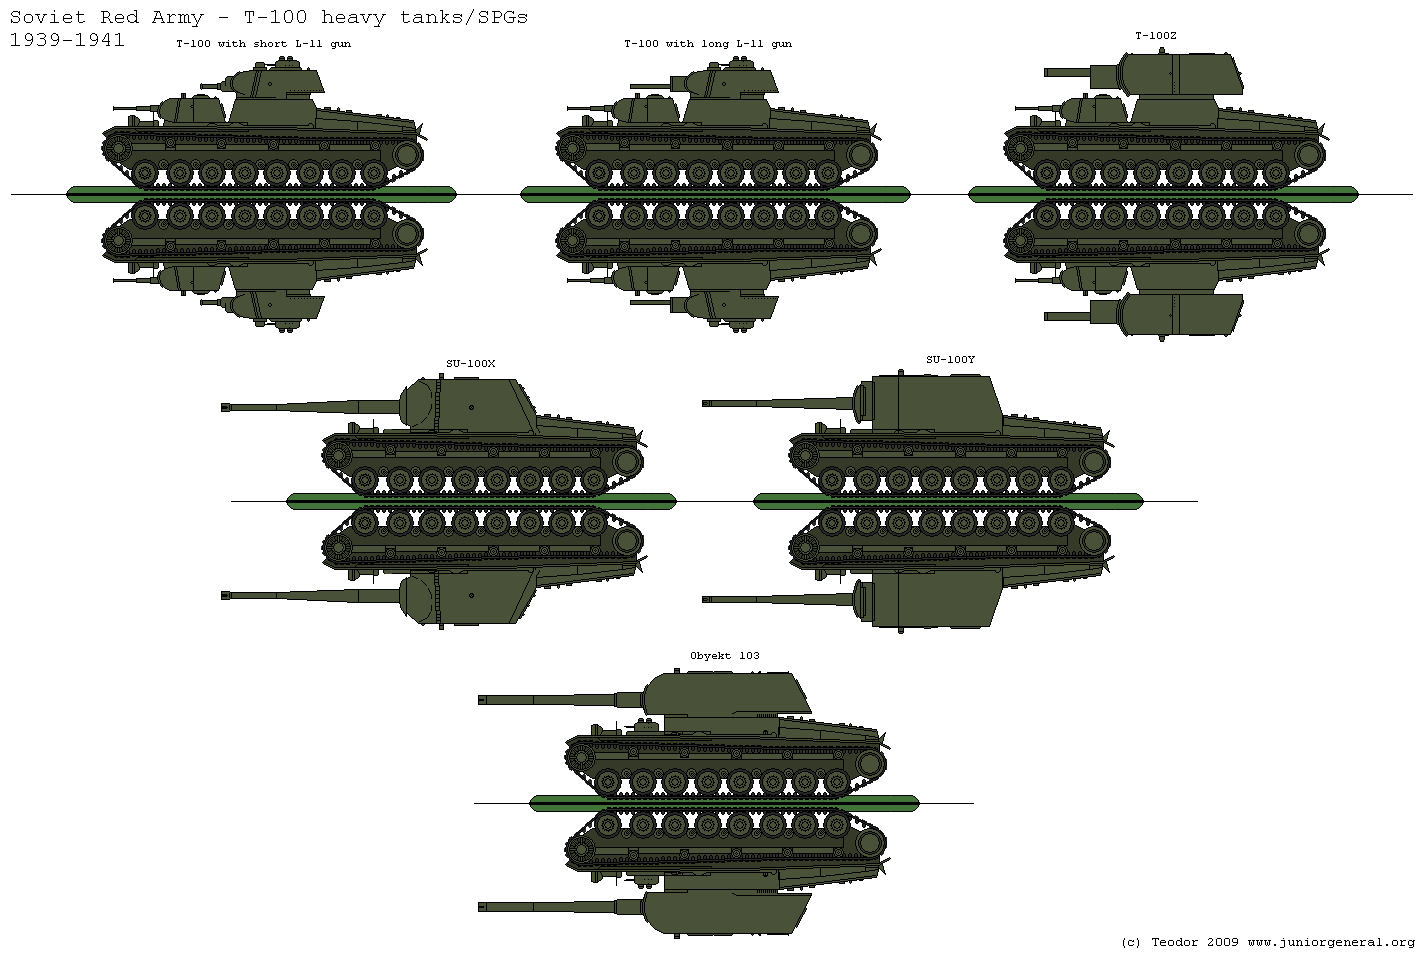 T-100 Heavy Tanks and SPGs